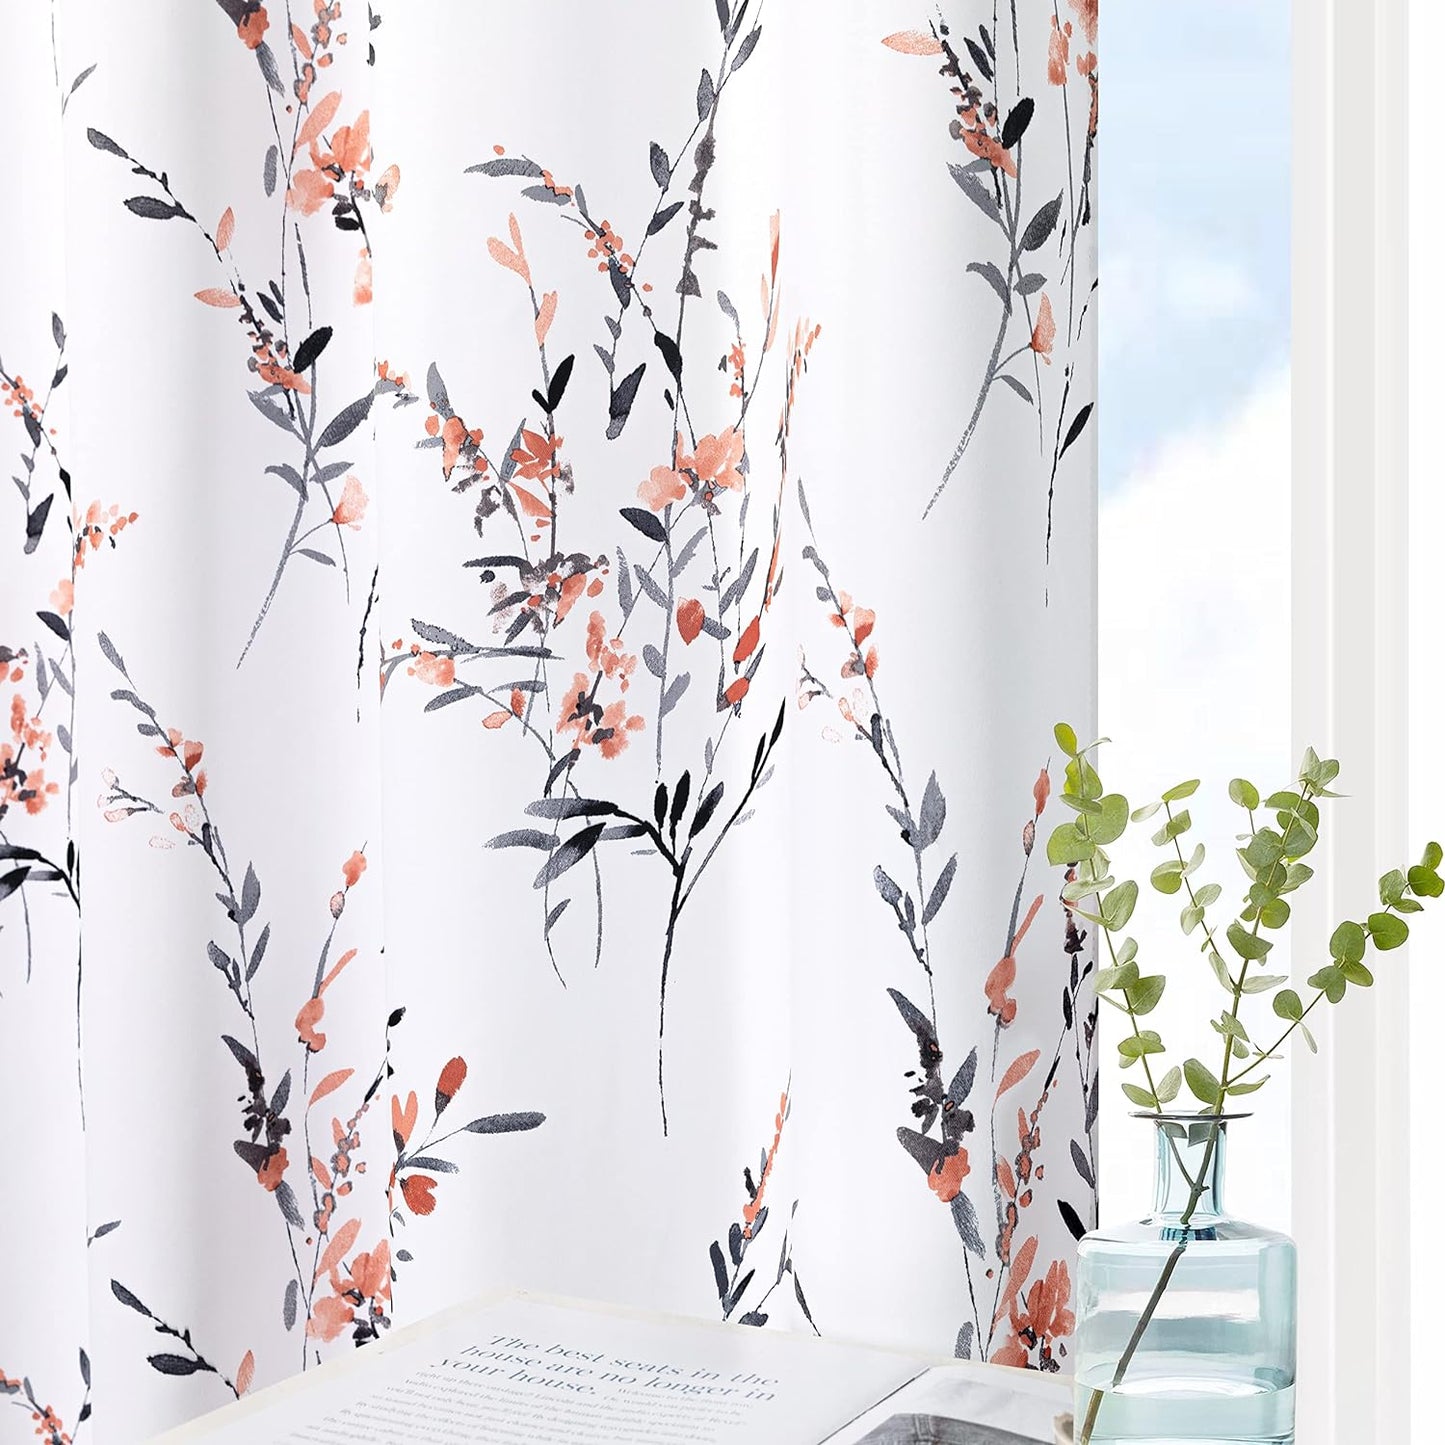 MYSKY HOME Living Room Curtains 84 Inches Long Floral Curtains Light Filtering Thermal Insulated Soft for Dining Room Farmhouse Leaf Grommet Curtains Home Decoration, Set of 2 Panels, Navy Blue  MYSKYTEX Coral 52"W X 108"L 